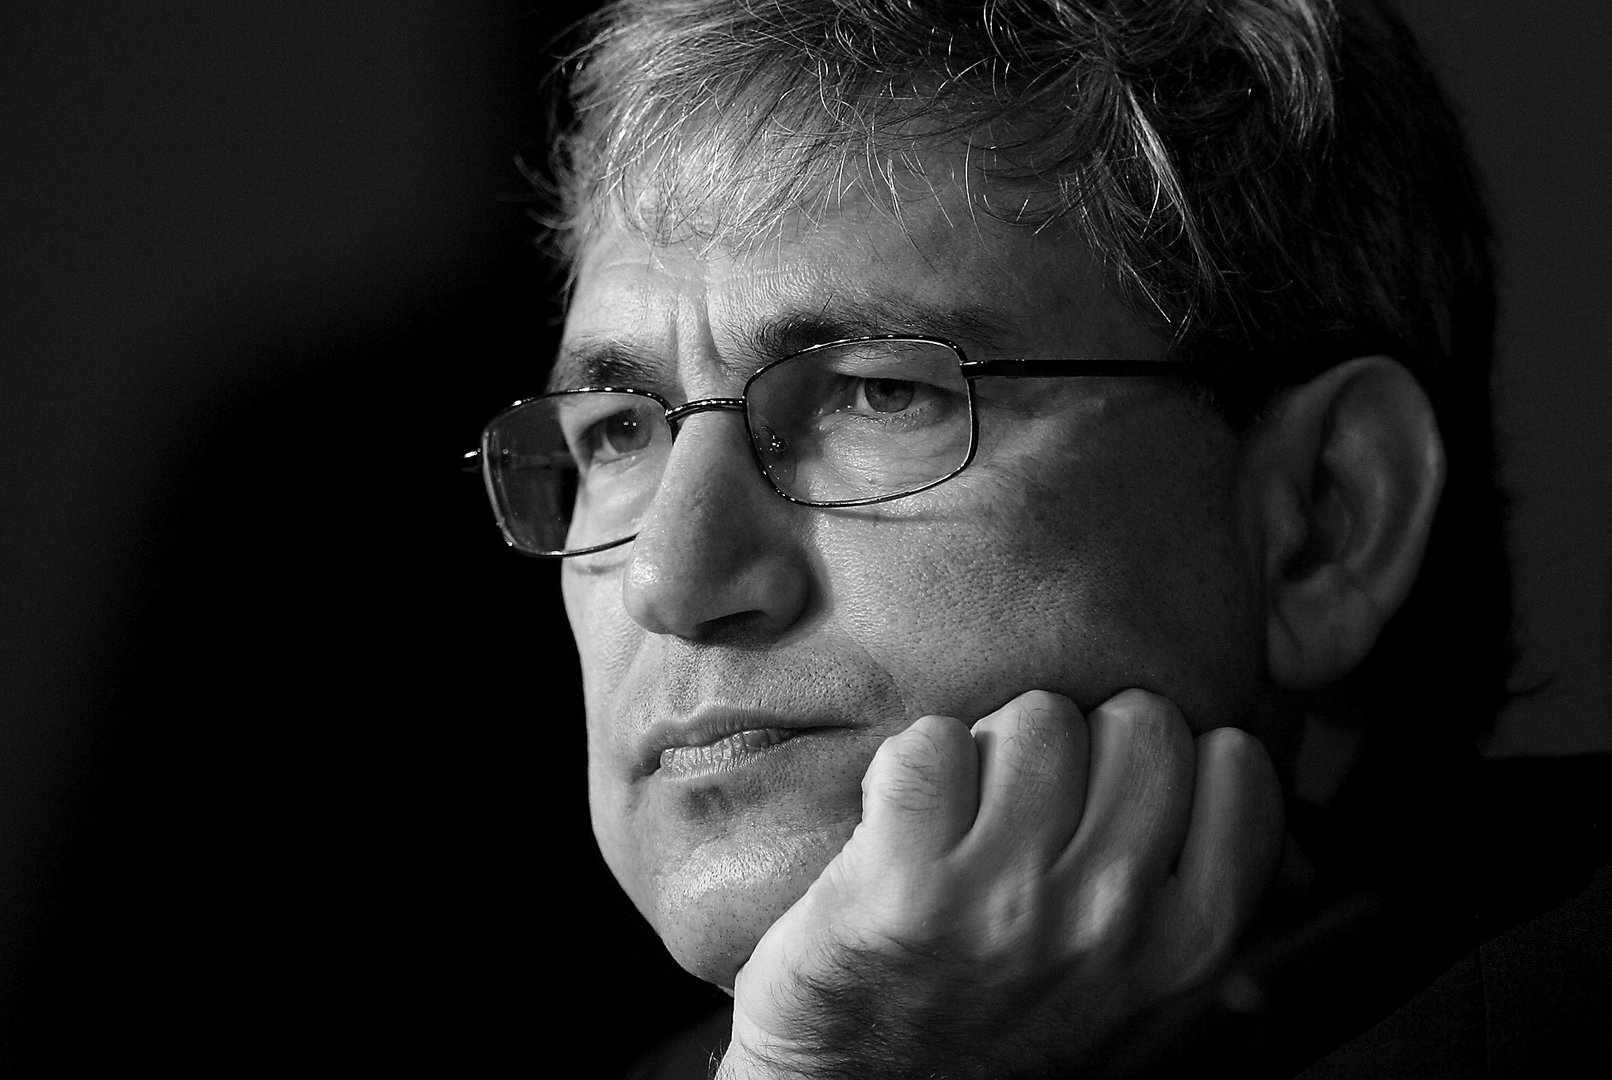 (Review) Orhan Pamuk: history, politics, and melancholy in modern Turkey